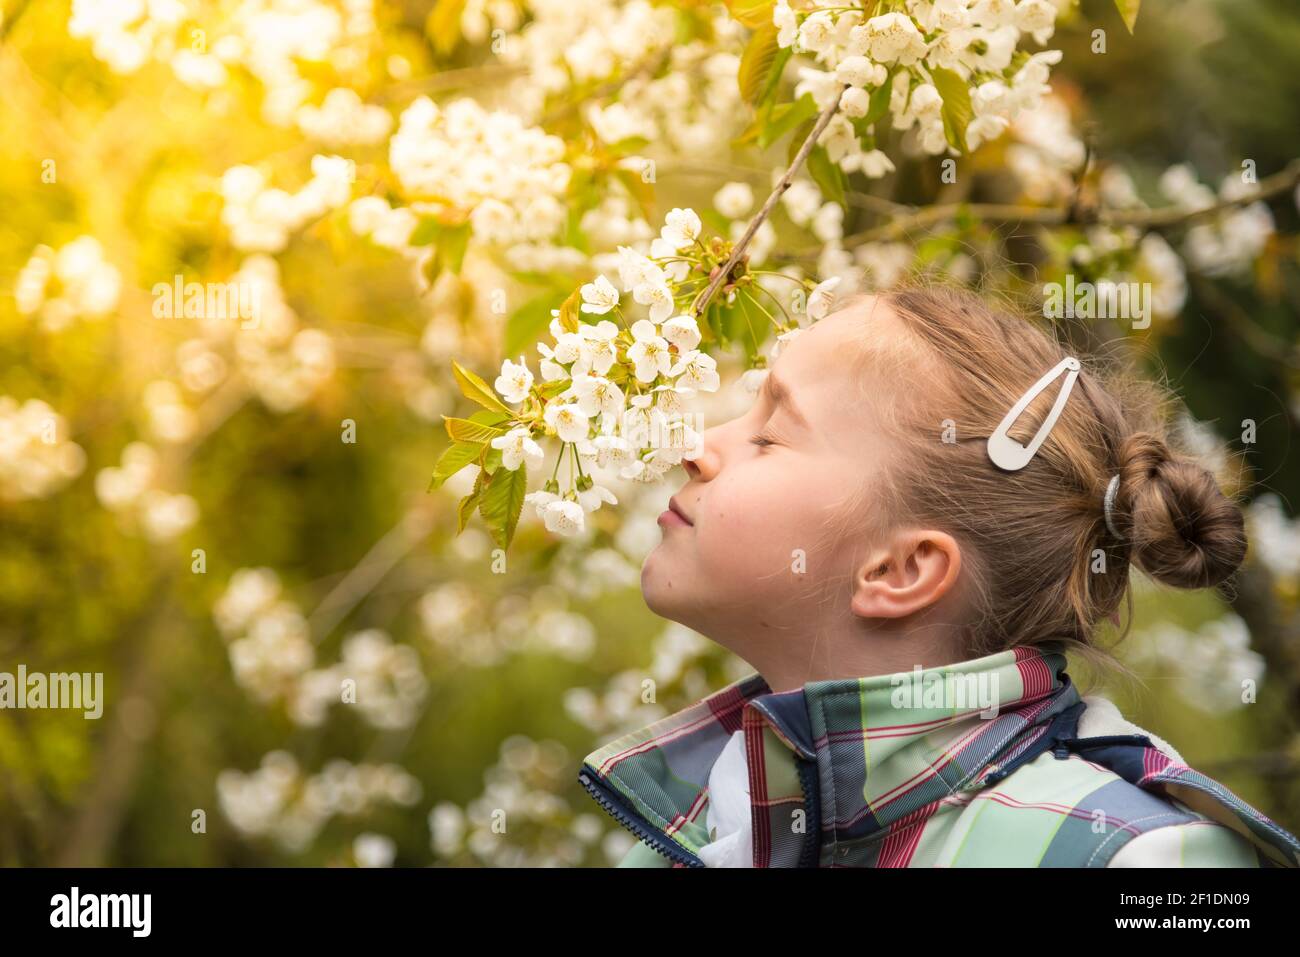 A day in spring Stock Photo